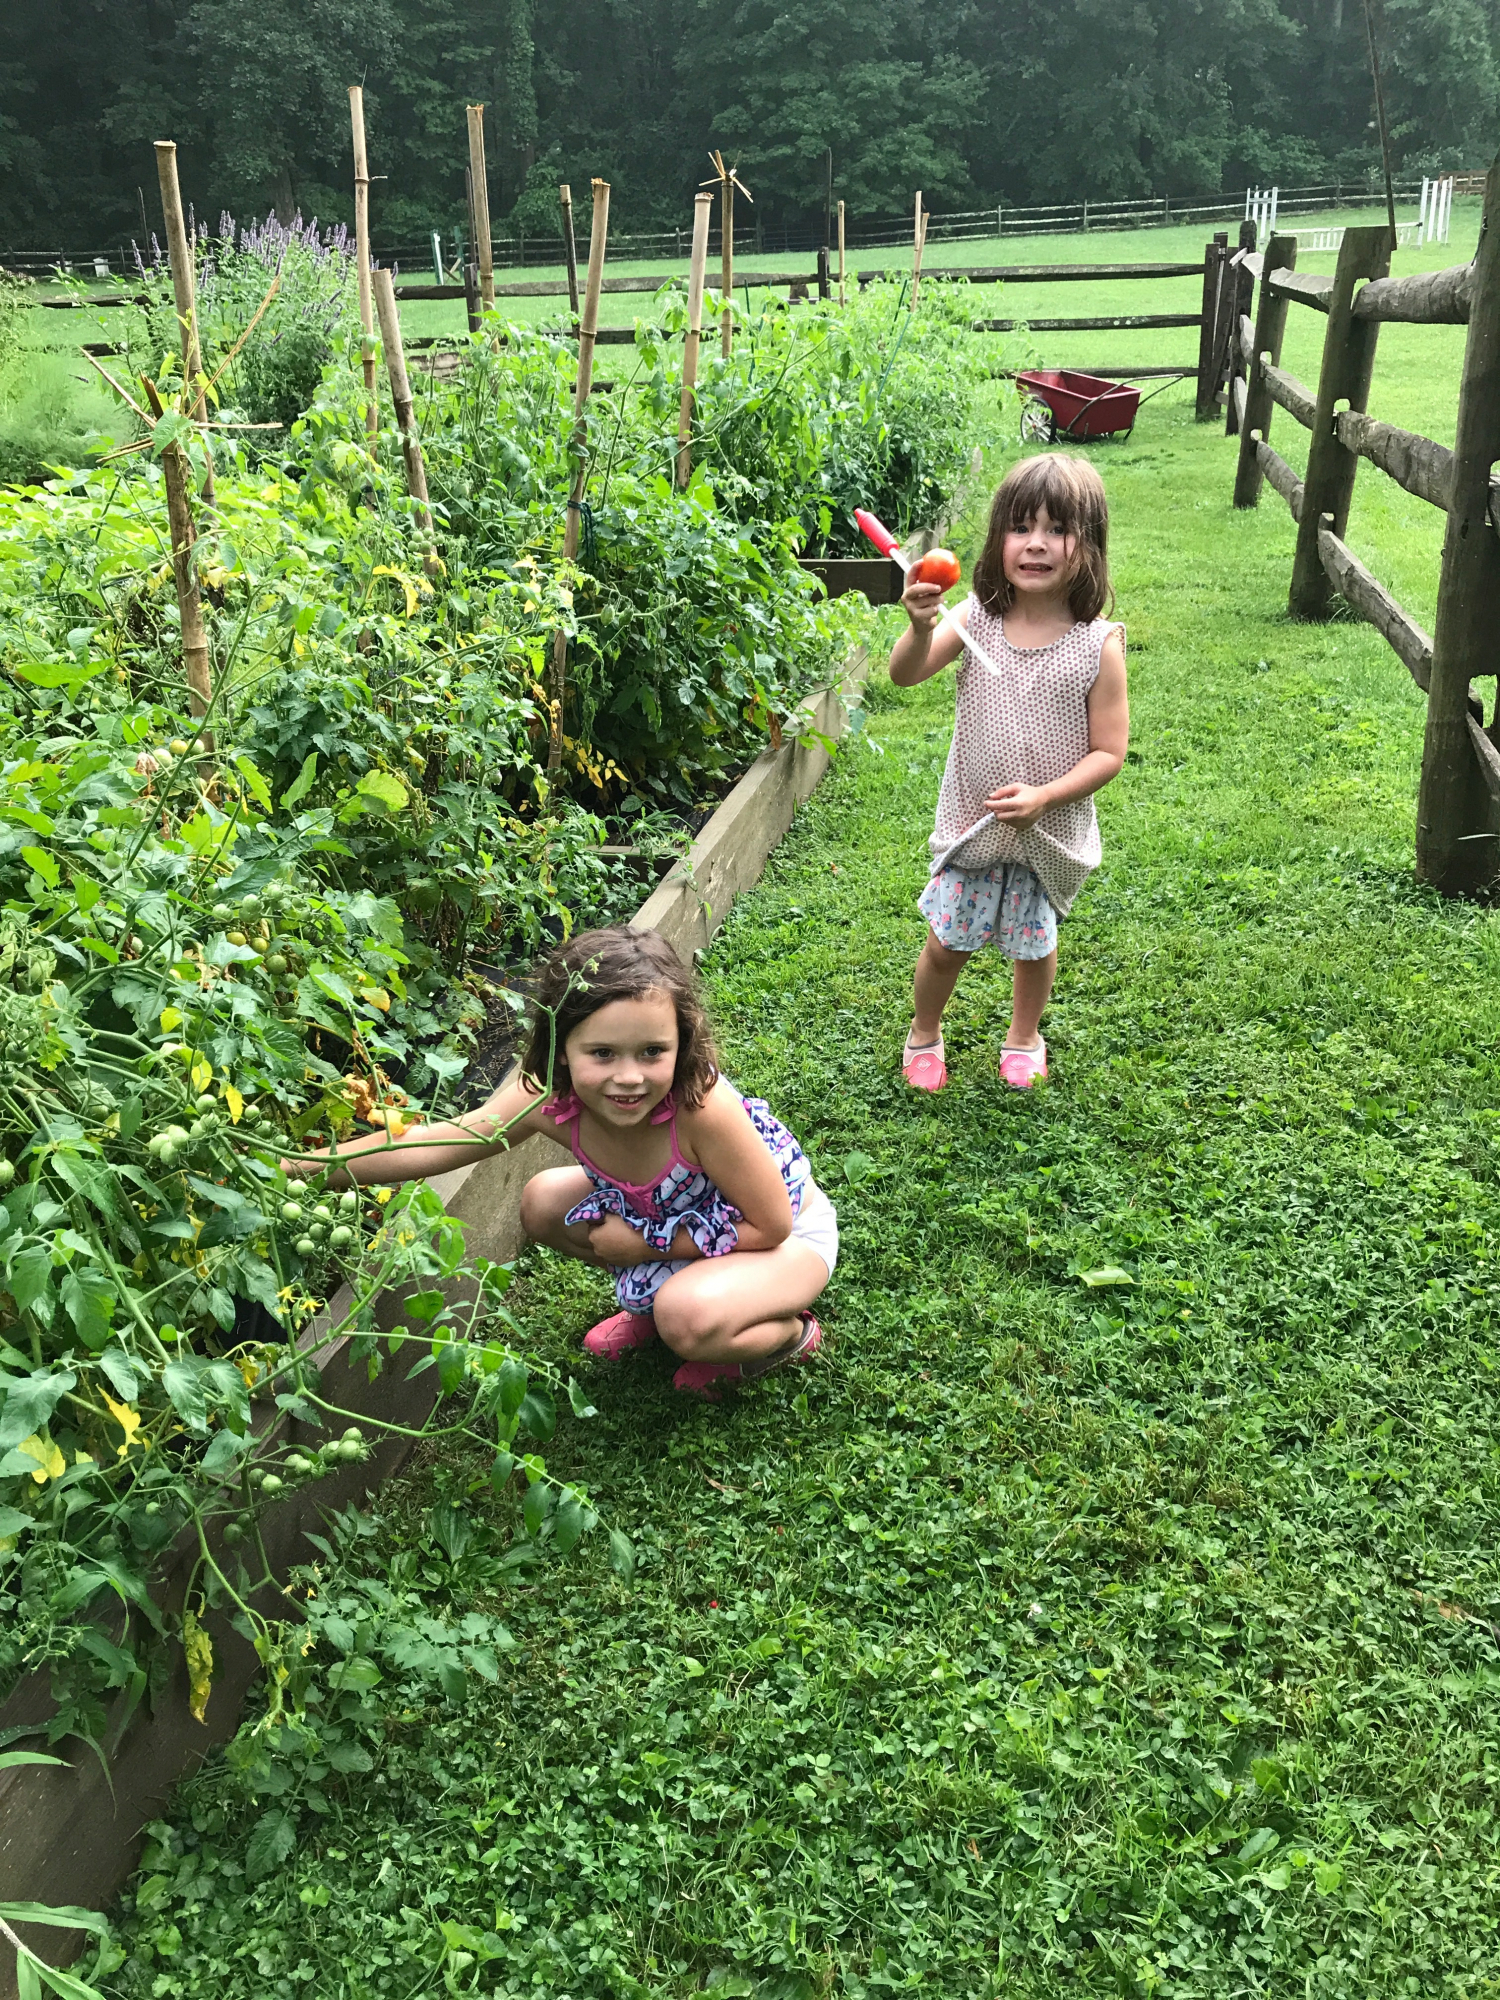 Two of the Etherington children and the vegetable garden at Rooster Run Farm.